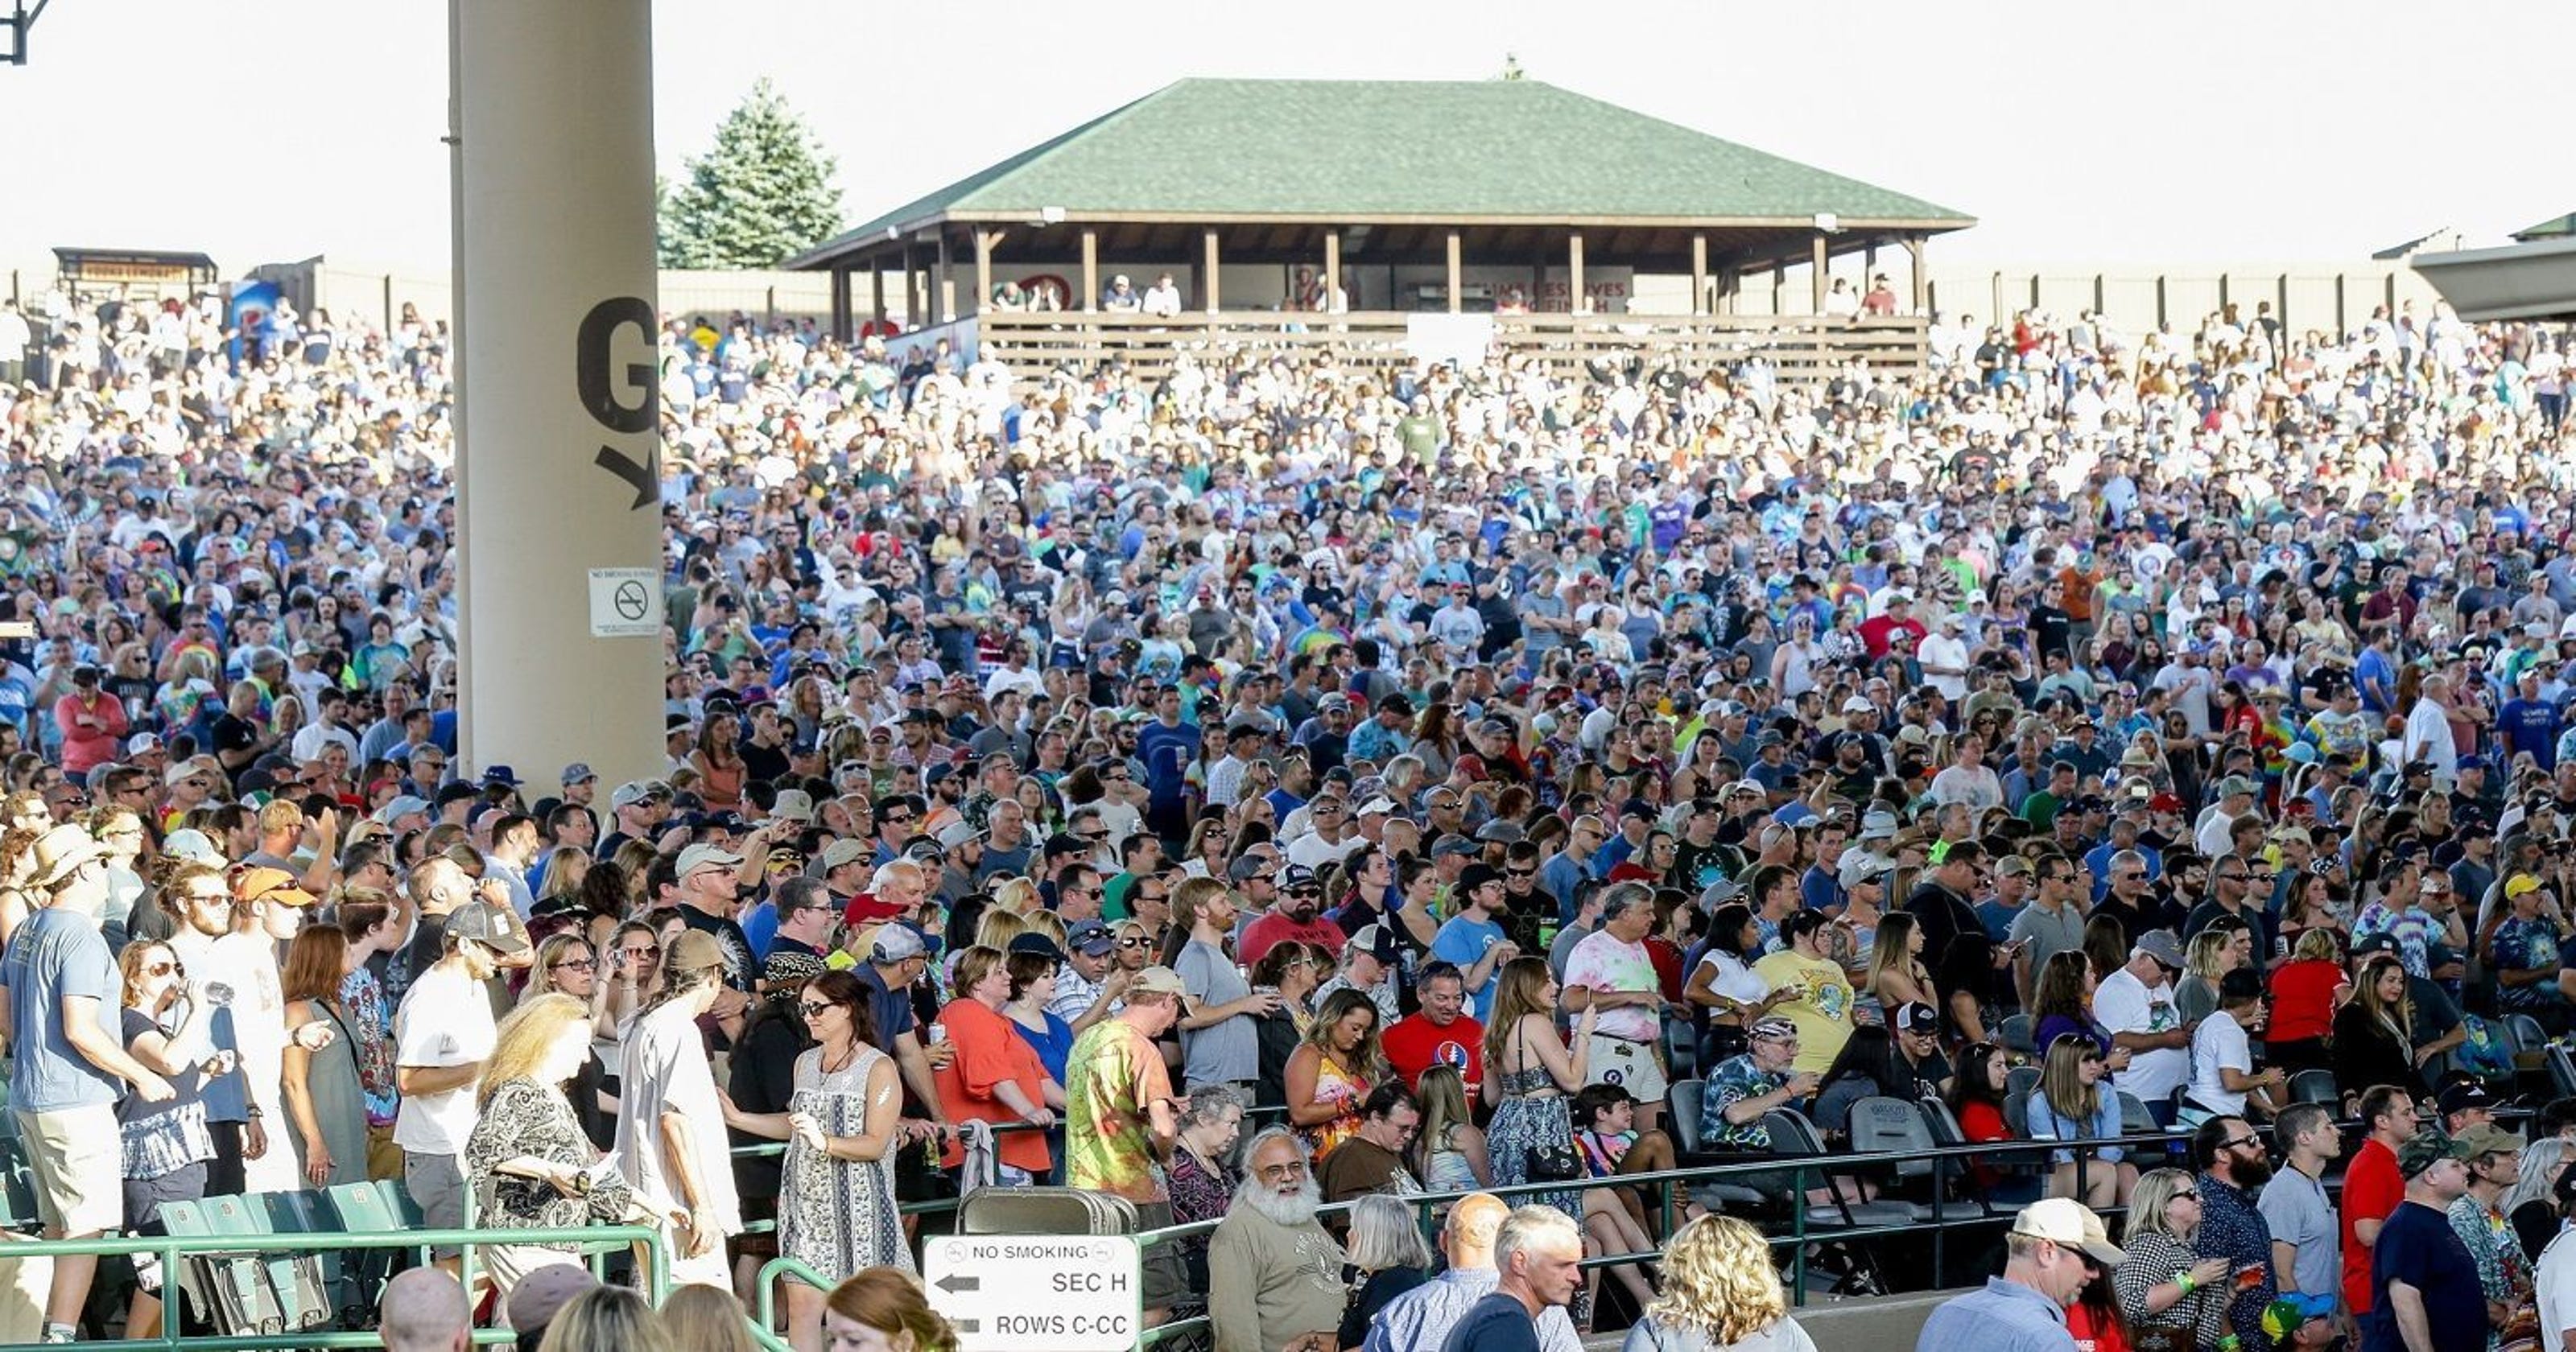 Ruoff concert venue offers season pass for lawn seating